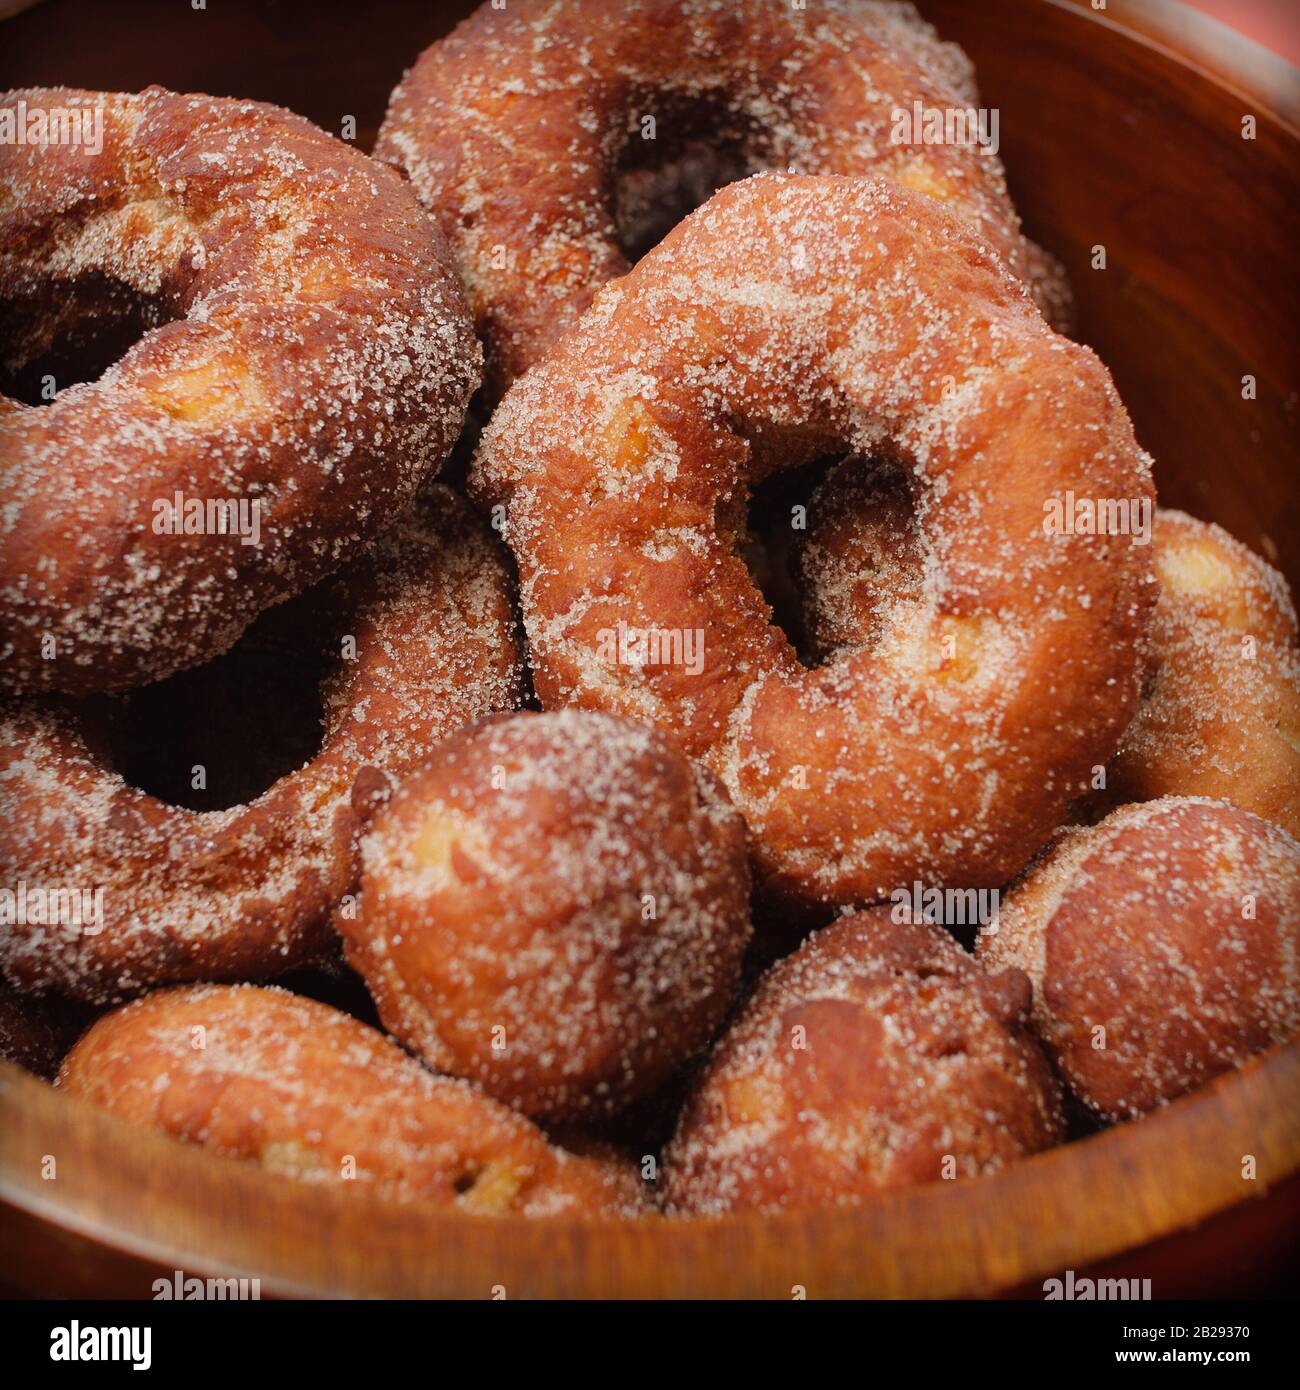 Close Up of Donuts in a Wooden Bowl Stock Photo